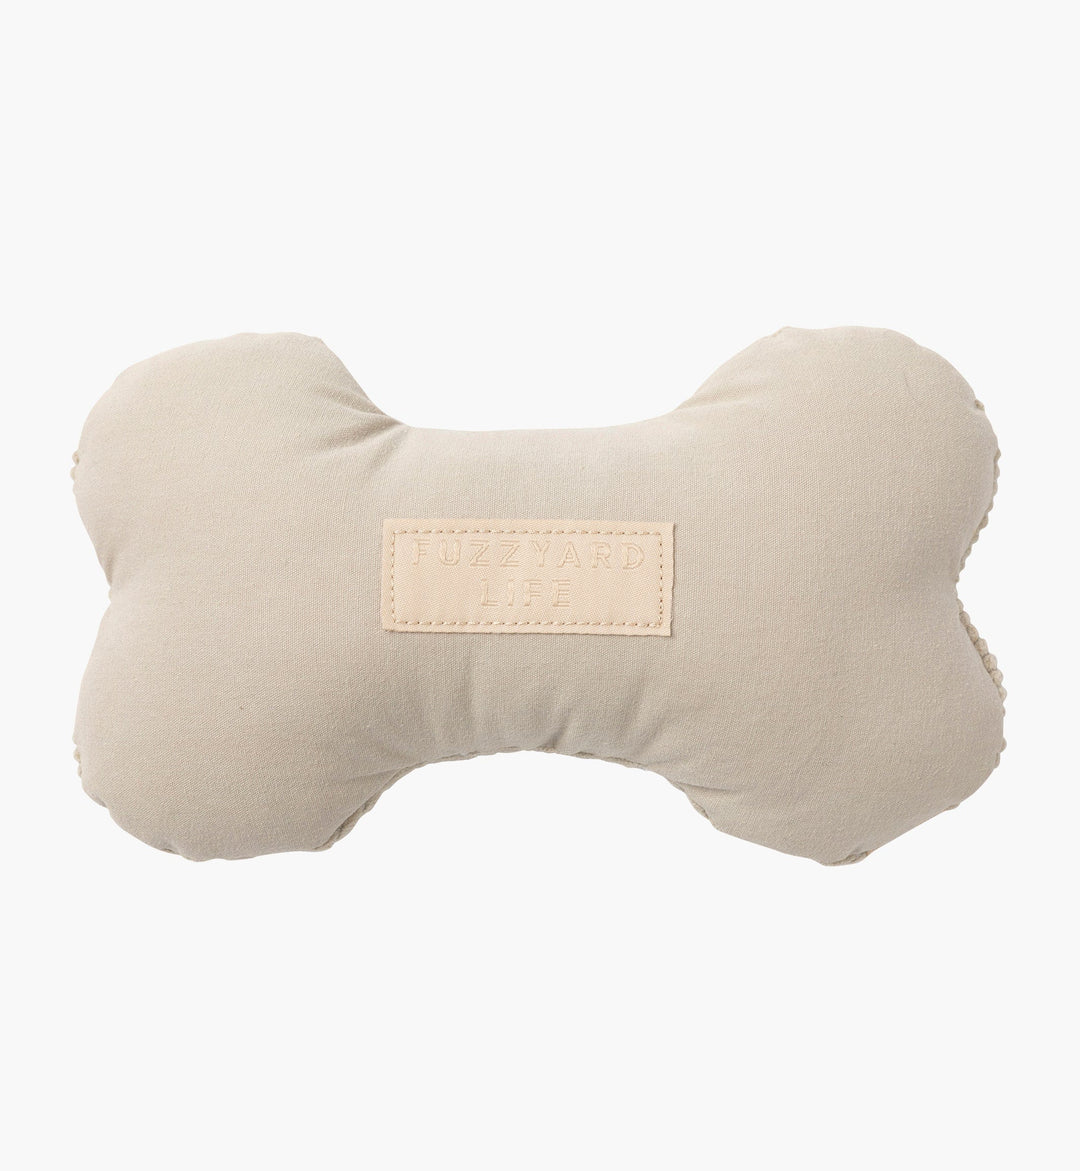 Dual-Sided Bone Dog Toy in Sandstone - Soft, Cuddly, and Durable